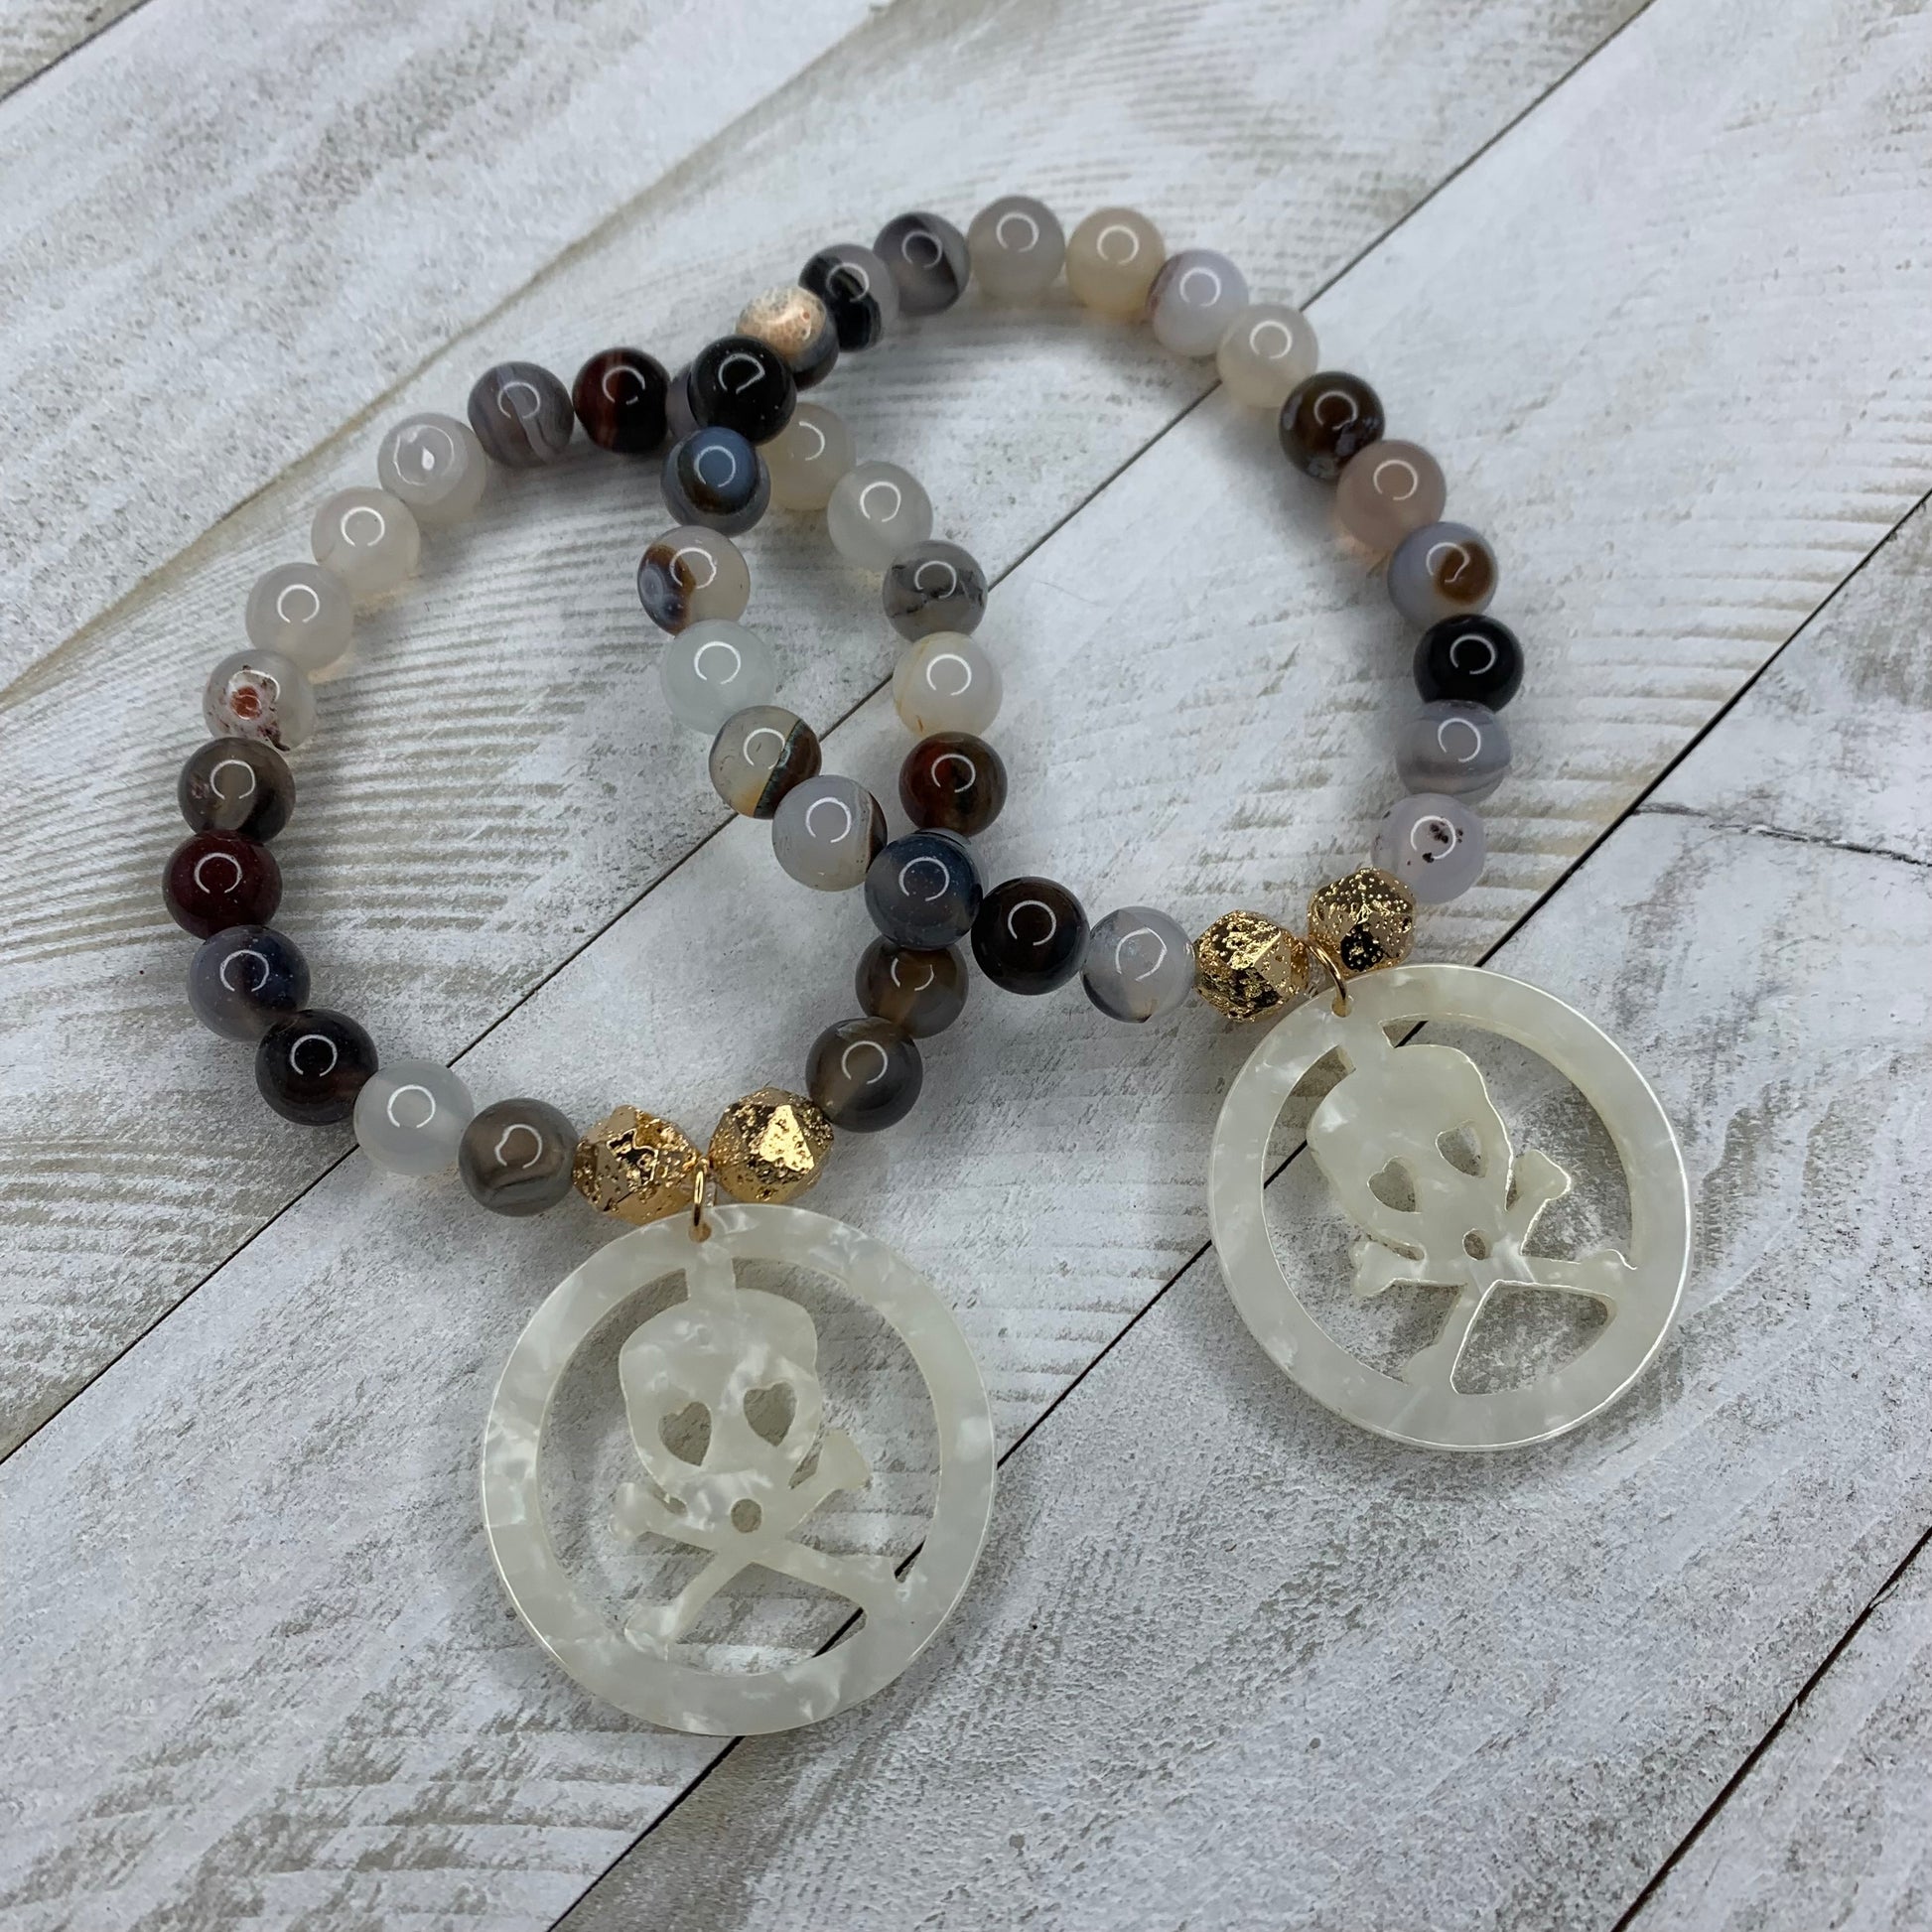 Stretchy 6mm Agate Beads Bracelet with an acetate crossed bones and skull charm 410-12 | Erika Williner Designs